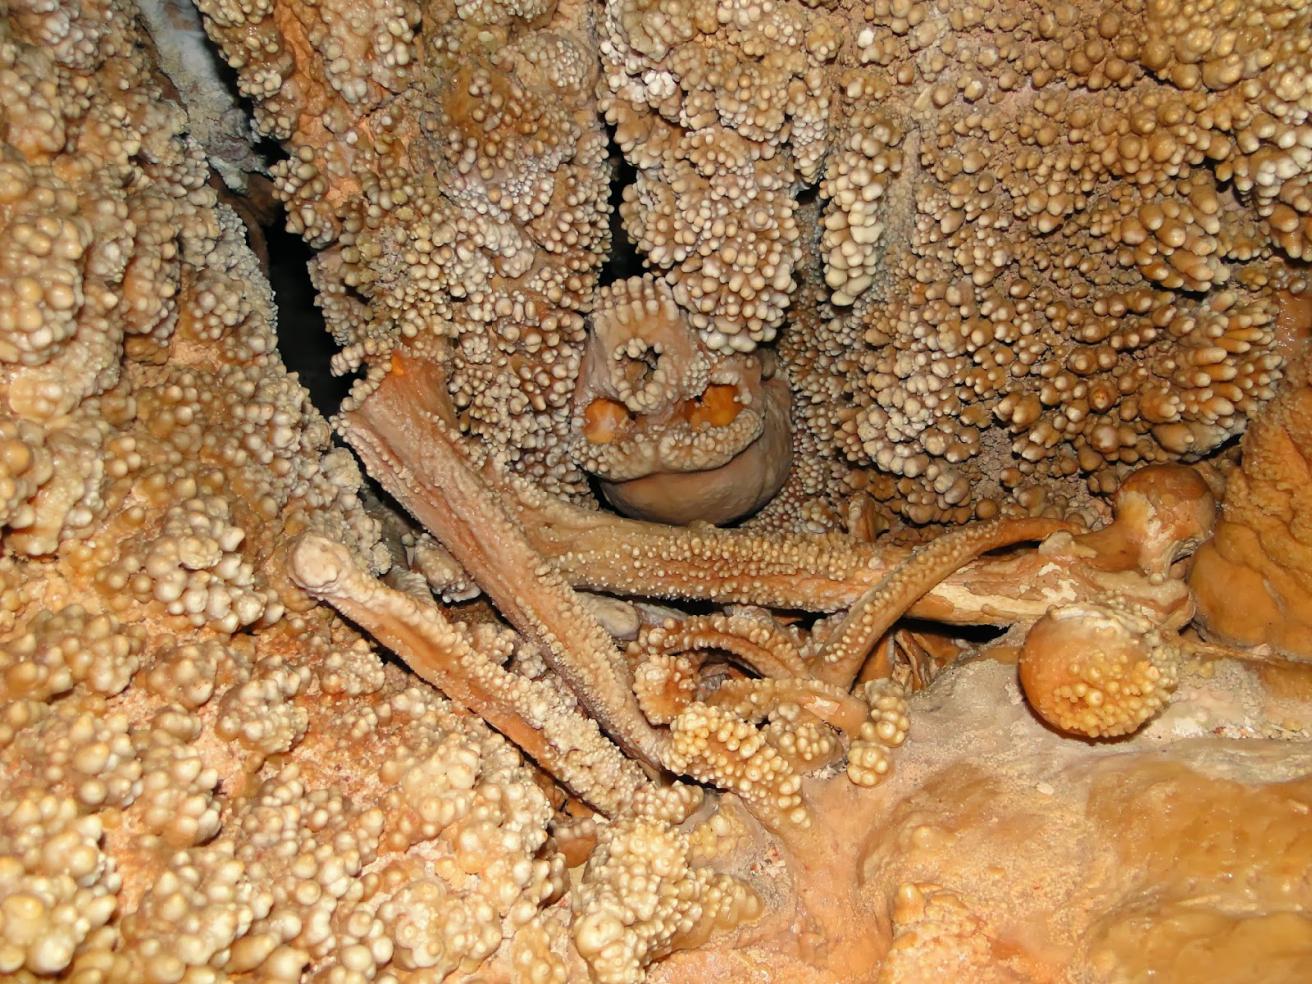 "Altamura Man" who fell down sinkhole 150,000 years ago starved to death and "fused" with its walls 1